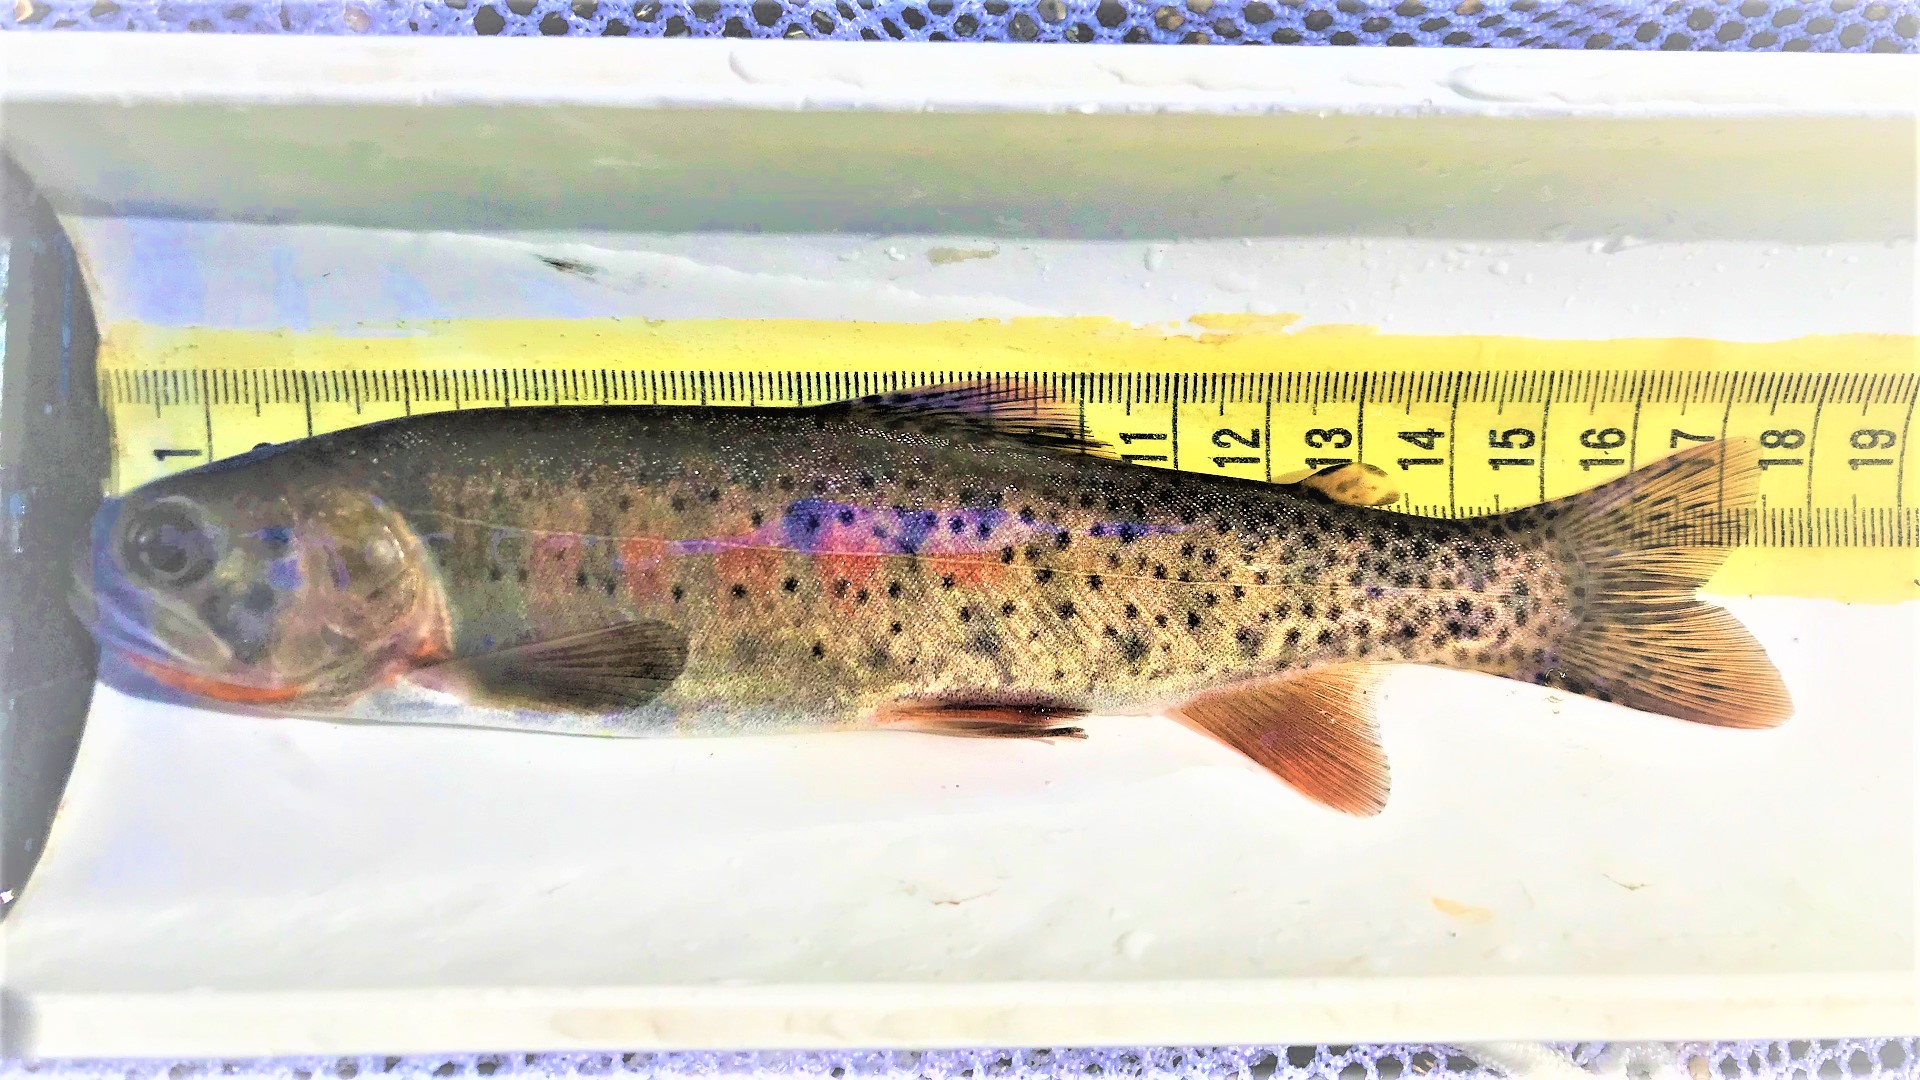 A trout on a measuring board